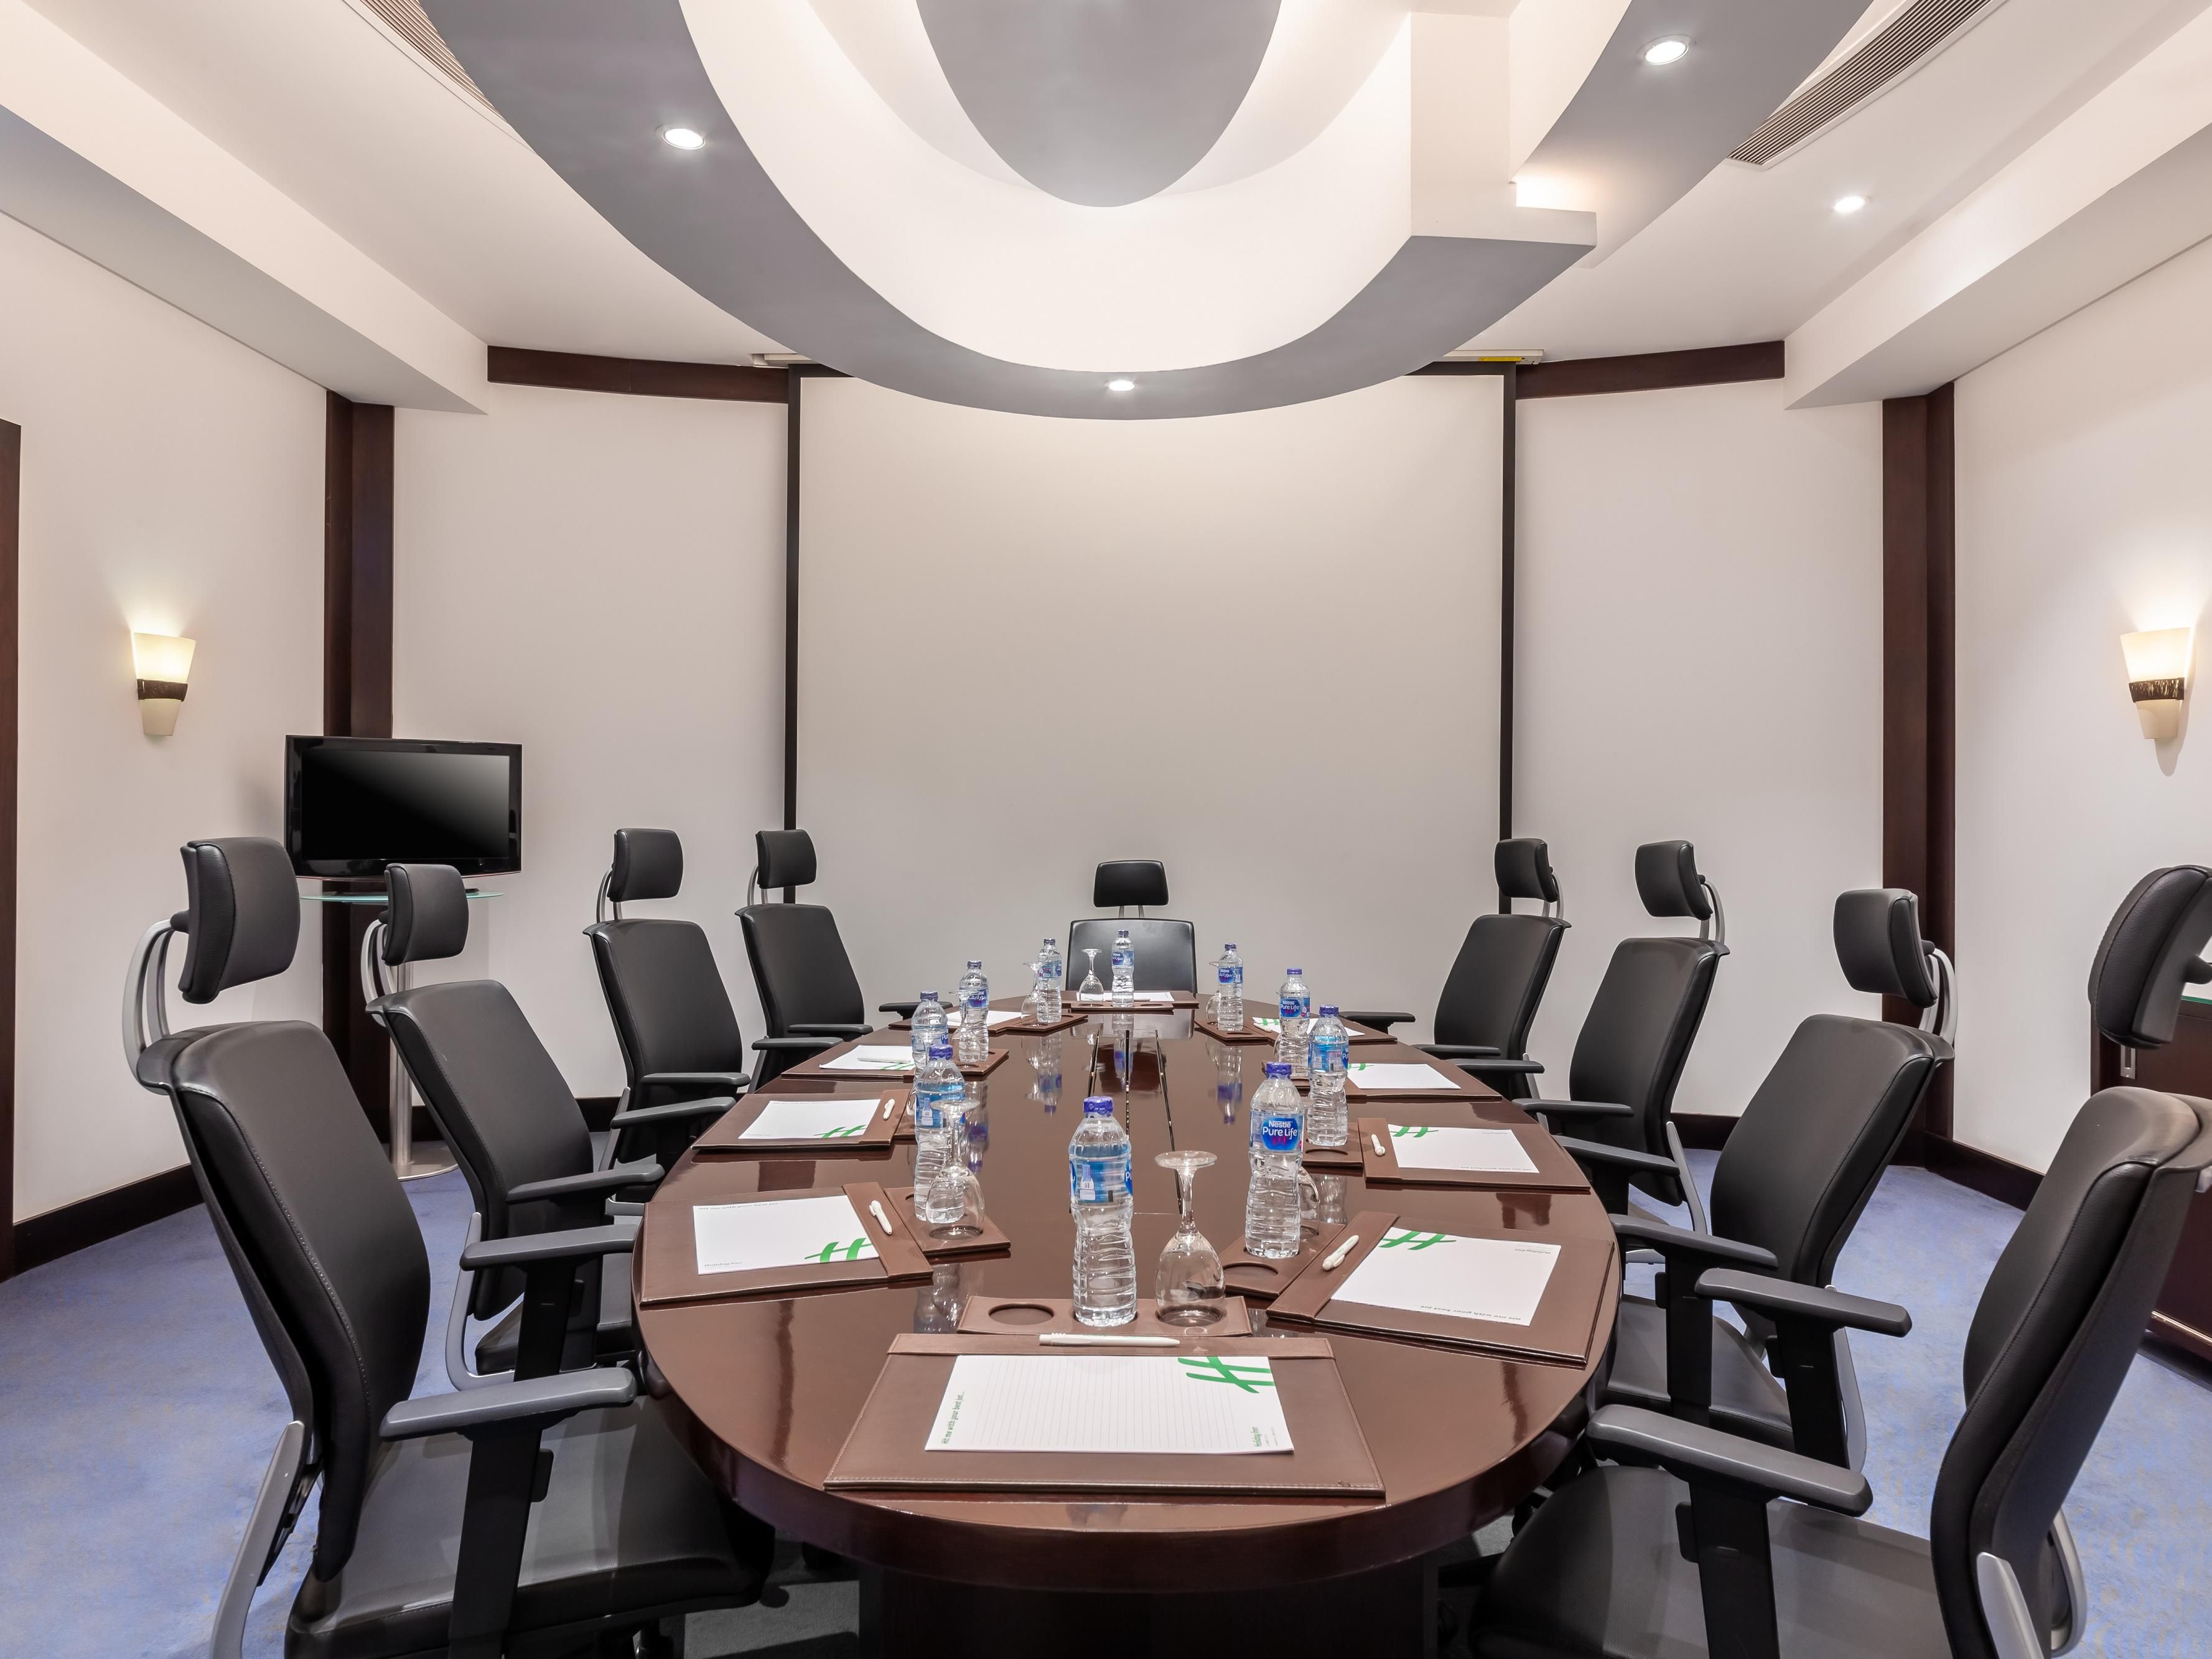 Cozy meetings, extensive seminars or even trainings and many more, Holiday Inn Cairo Maadi's banquet rooms are there to fulfill all your requests. Our highly equipped 14 meeting rooms with their variety of spaces can serve all your demands, just leave it to our skillful team who will handle everything with professionalism & success.